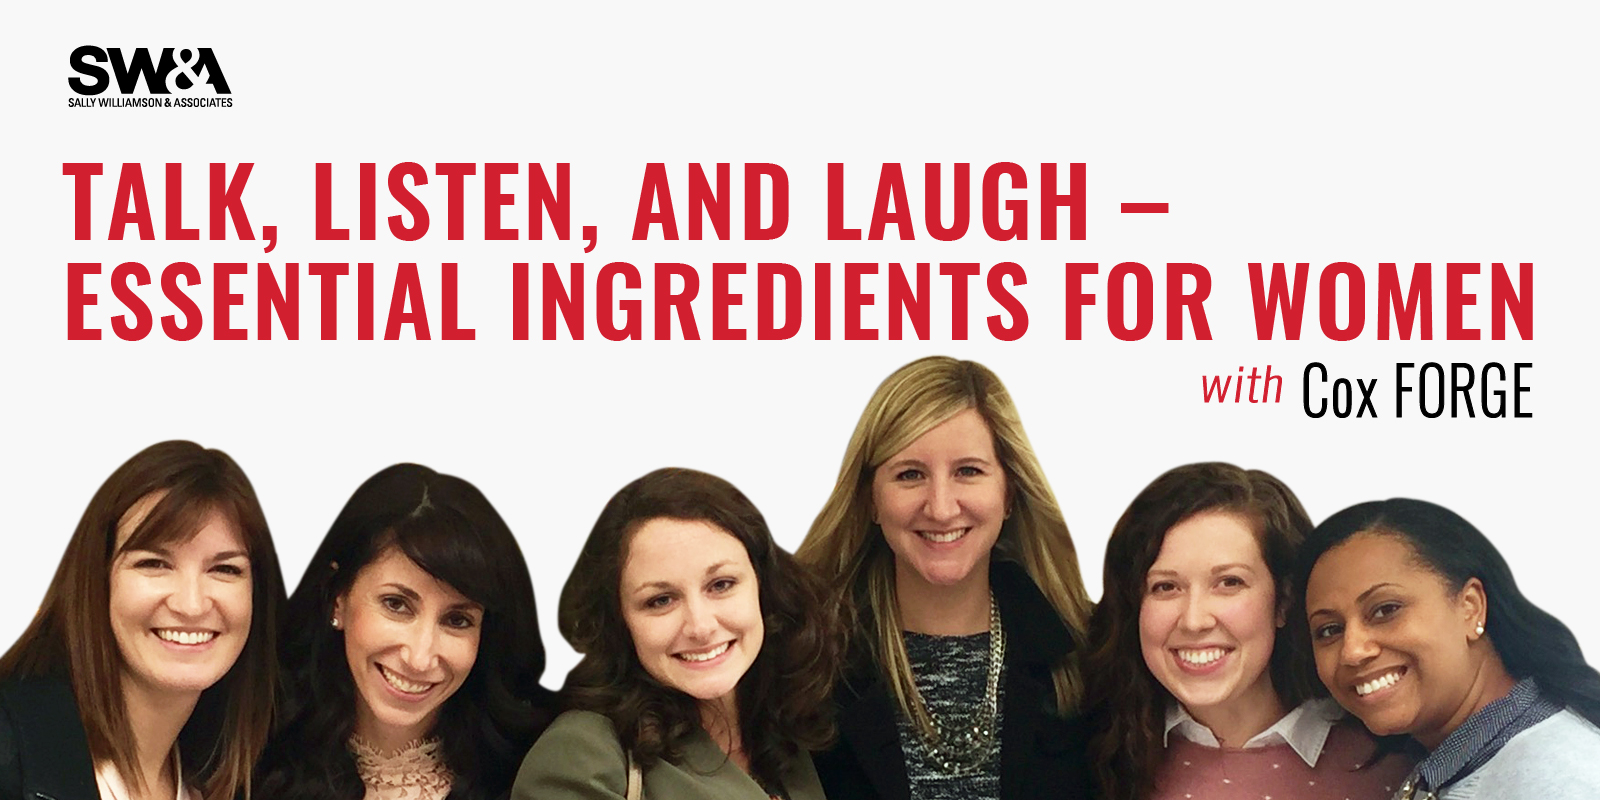 Talk, Listen, and Laugh – Essential Ingredients for Women (with Cox FORGE)